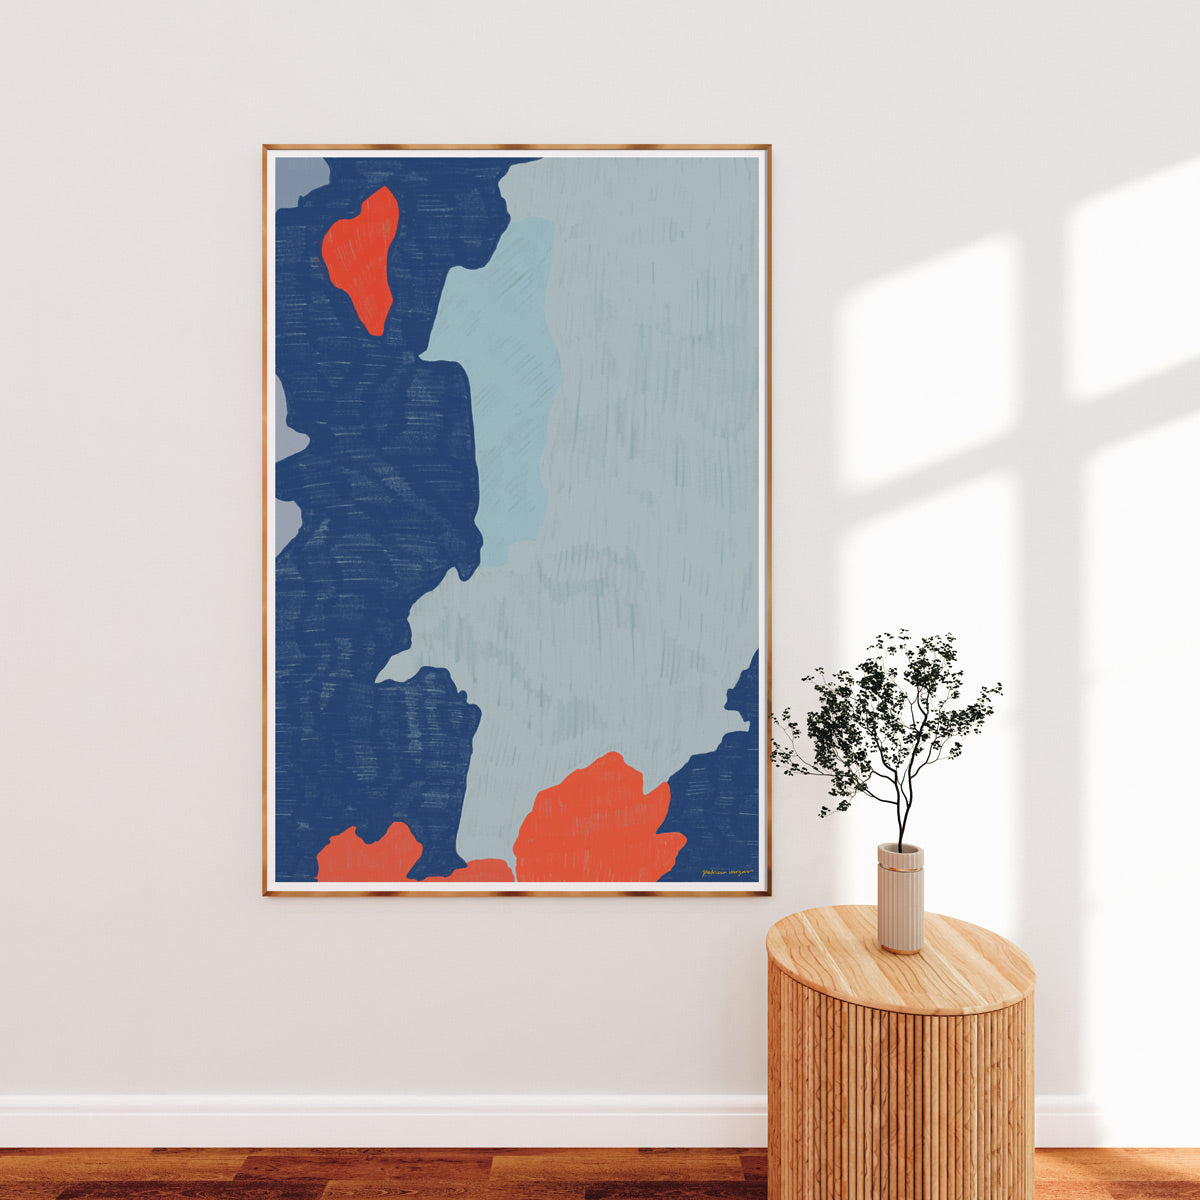 Color Field No.3, blue and red colorful abstract wall art print by Parima Studio. Oversize art for large wall space in dining room